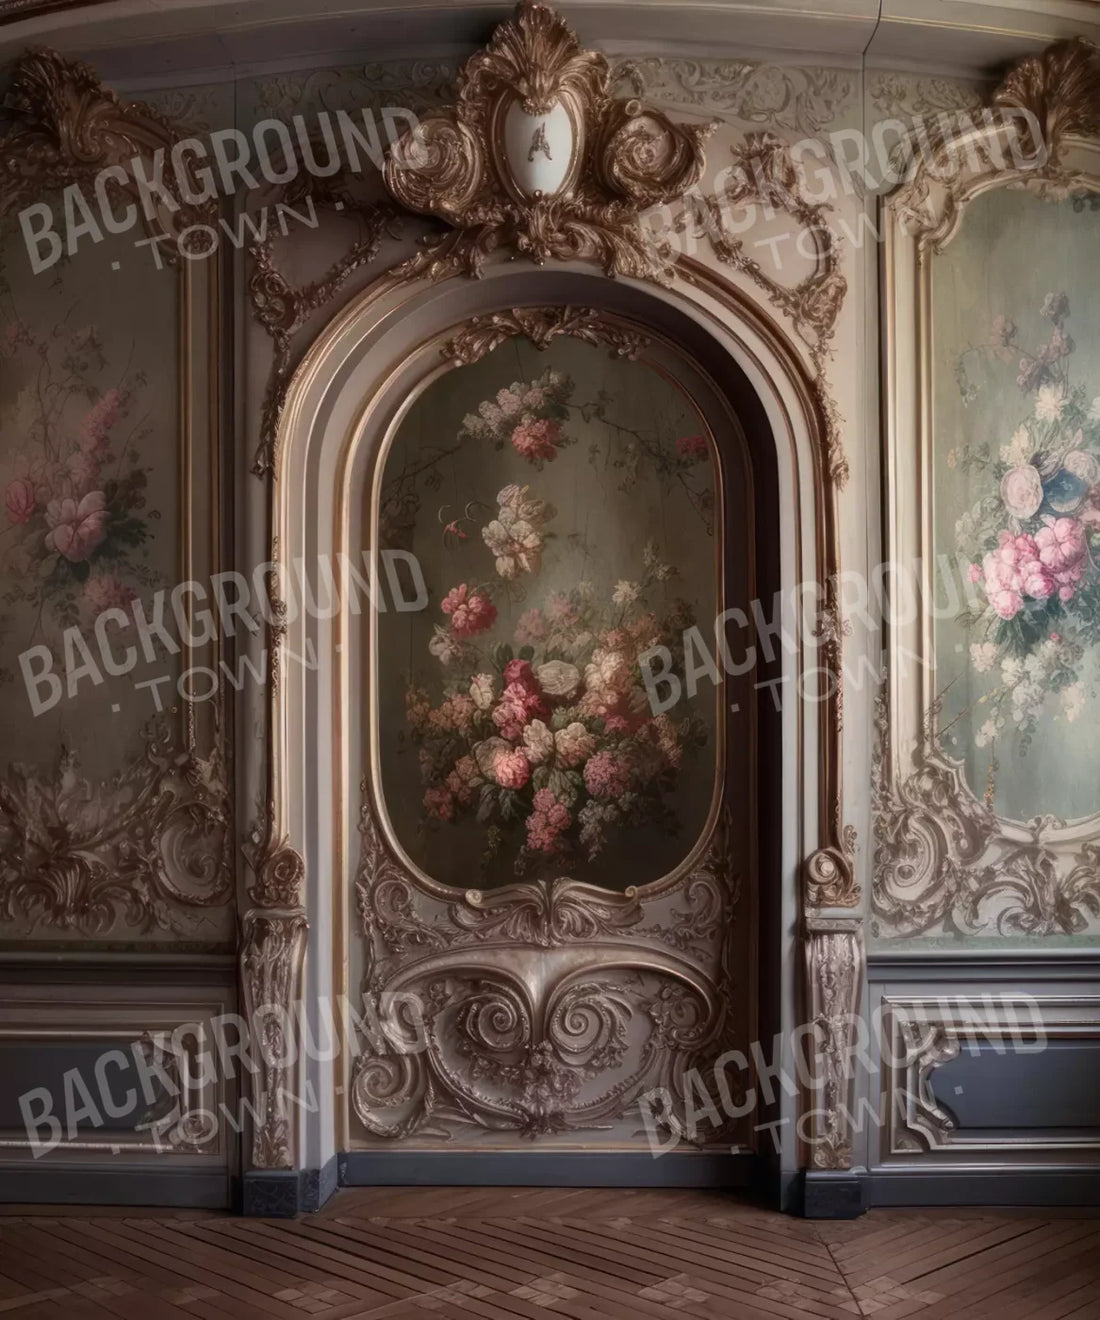 [vintage] [arch] [floral] Backdrop for Photography